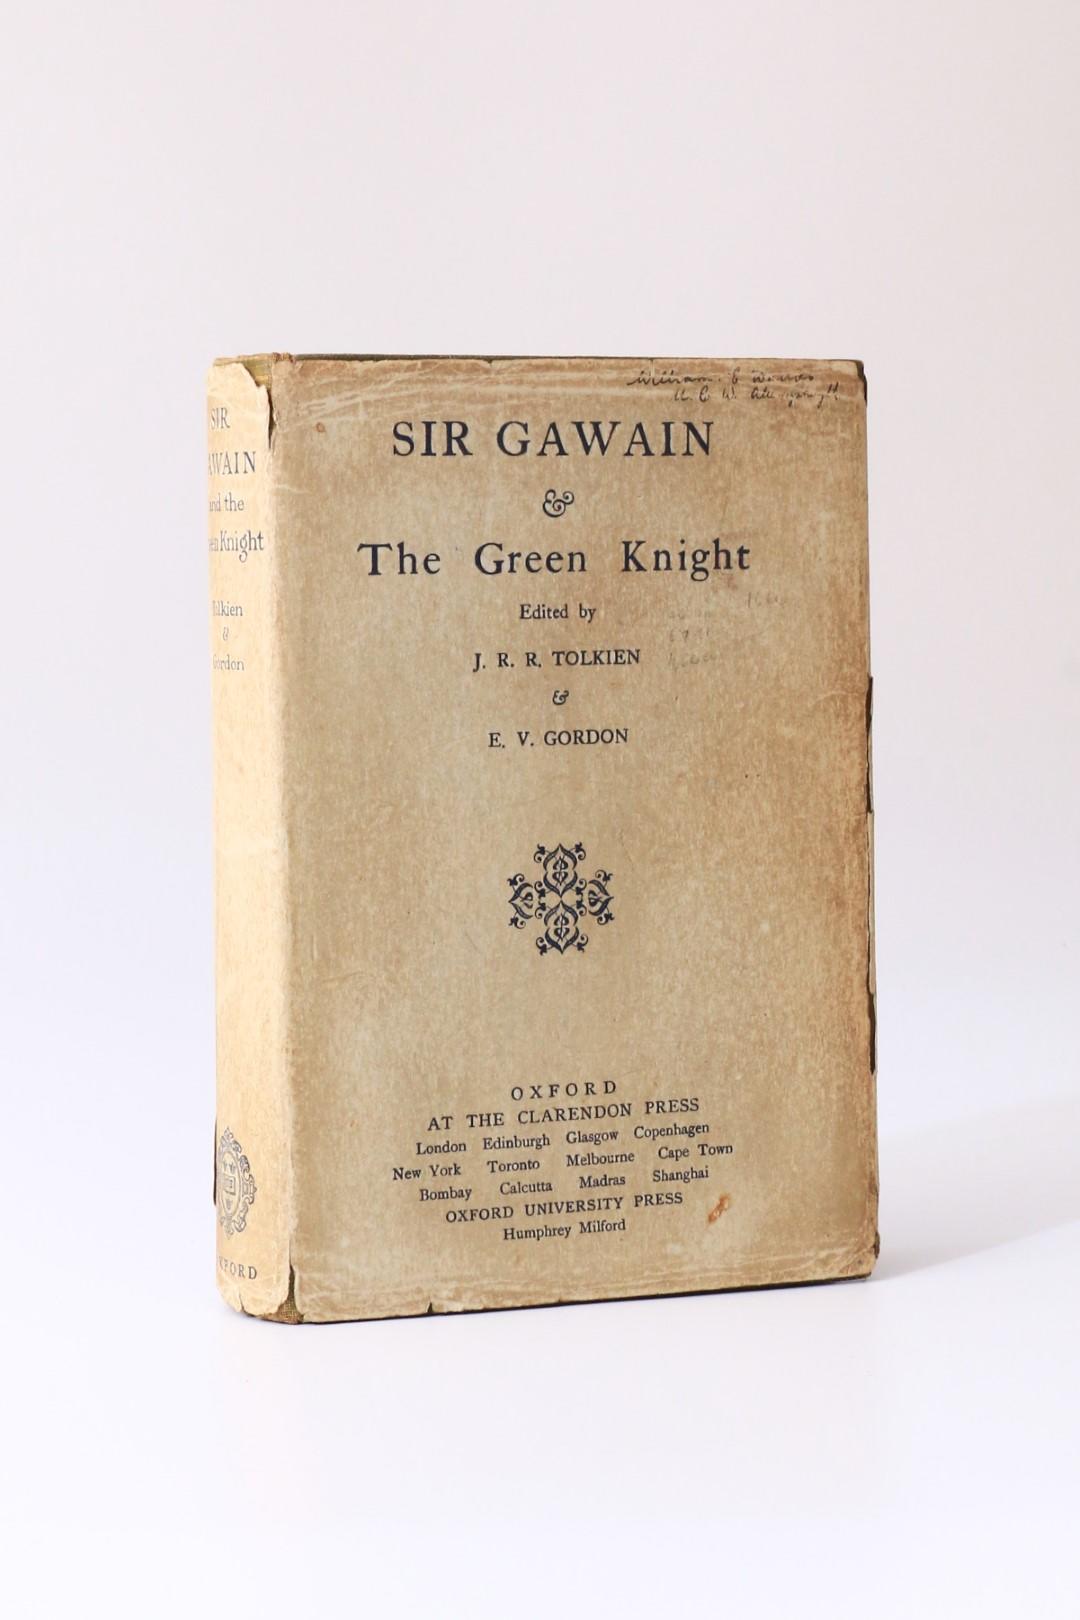 J.R.R. Tolkien - Sir Gawain and the Green Knight - Oxford University Press, 1925, First Edition.